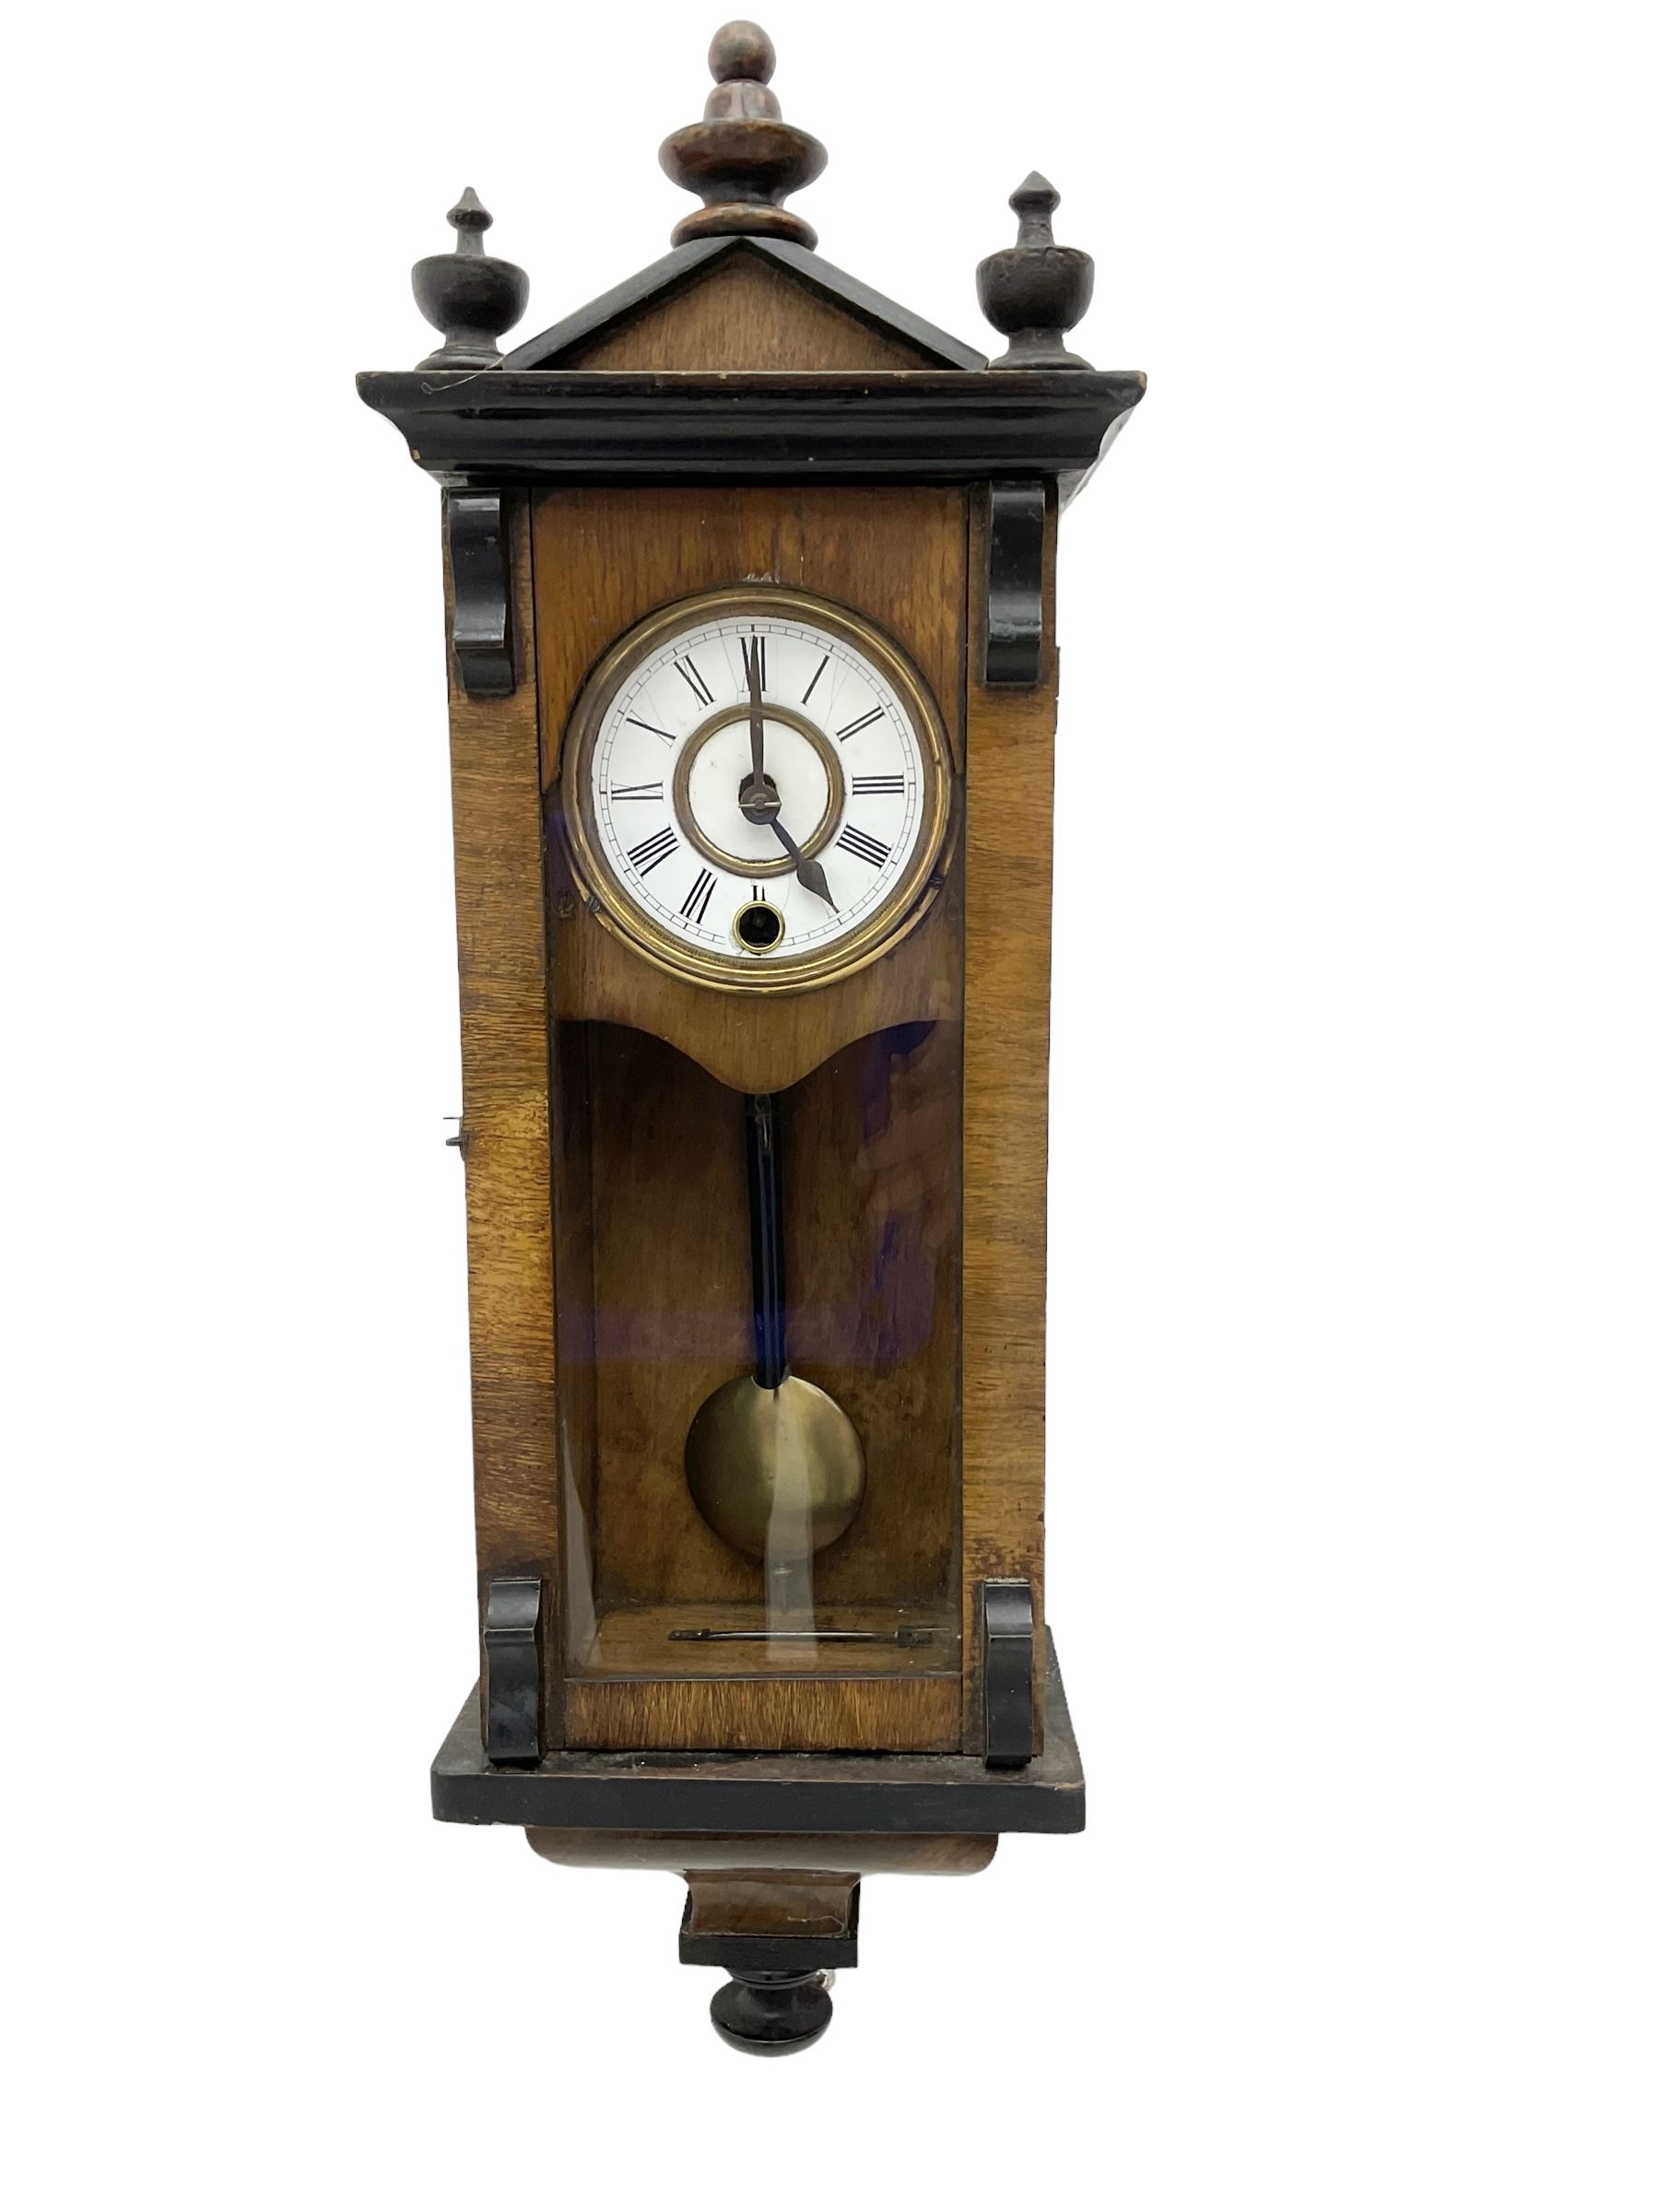 German - miniature 8-day timepiece wall clock in a walnut and ebonised case